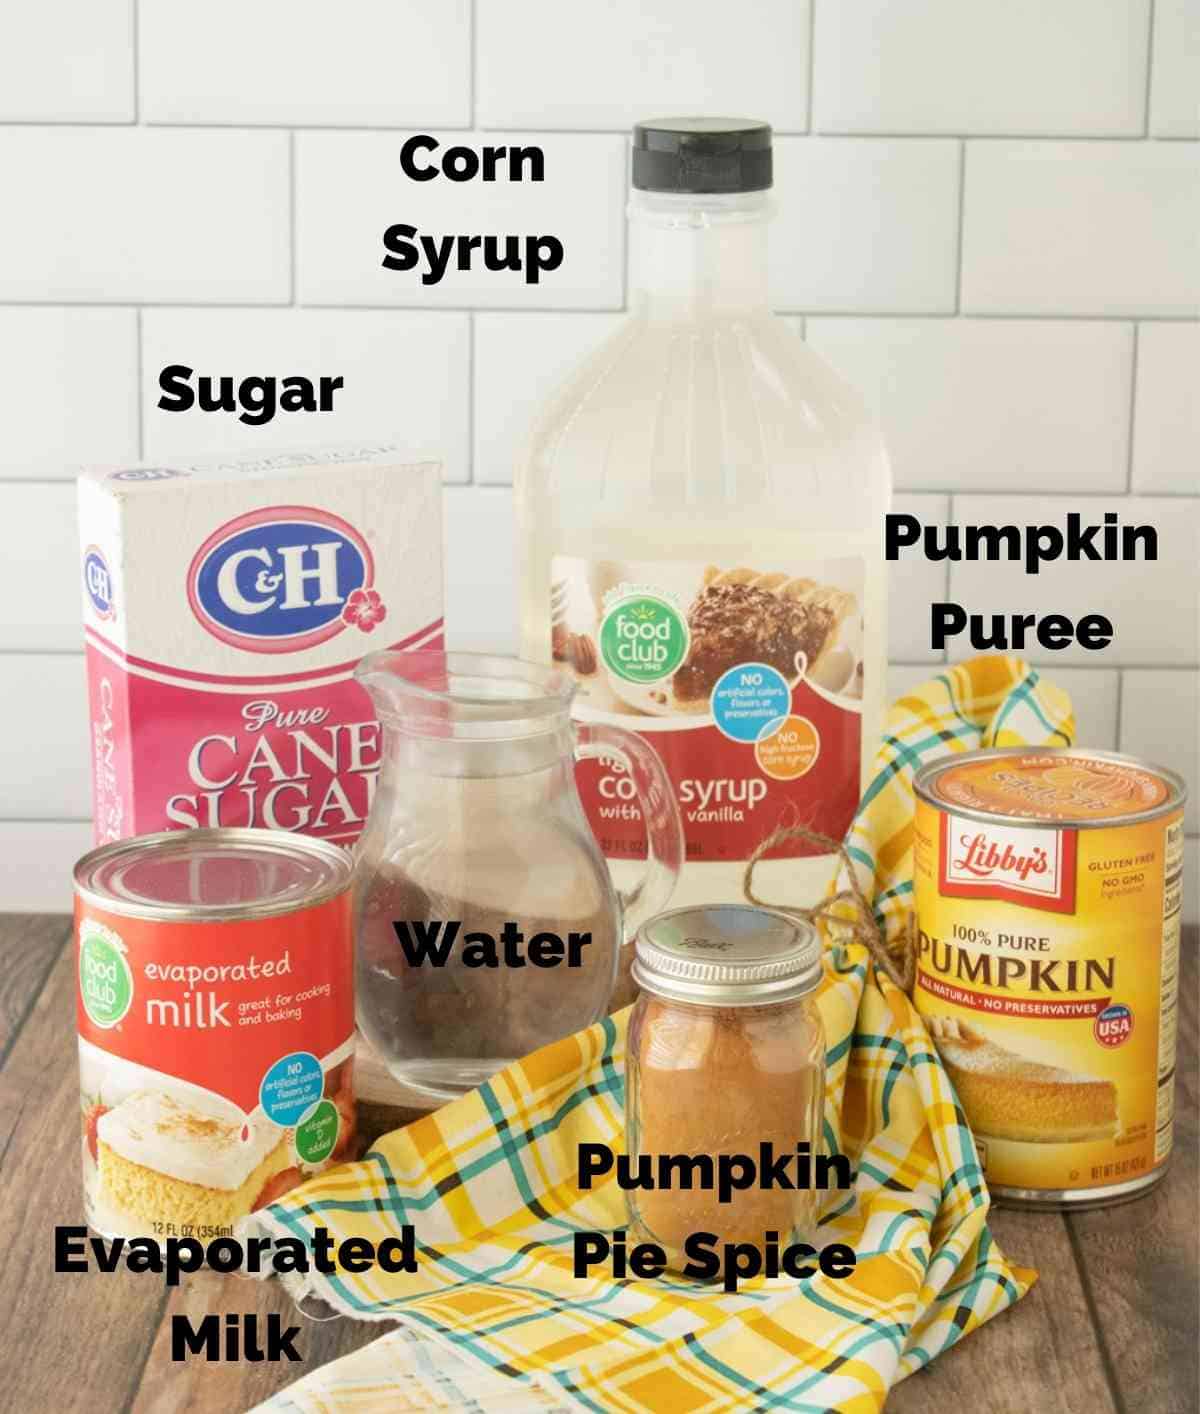 Ingredients to make this pumpkin spice syrup.